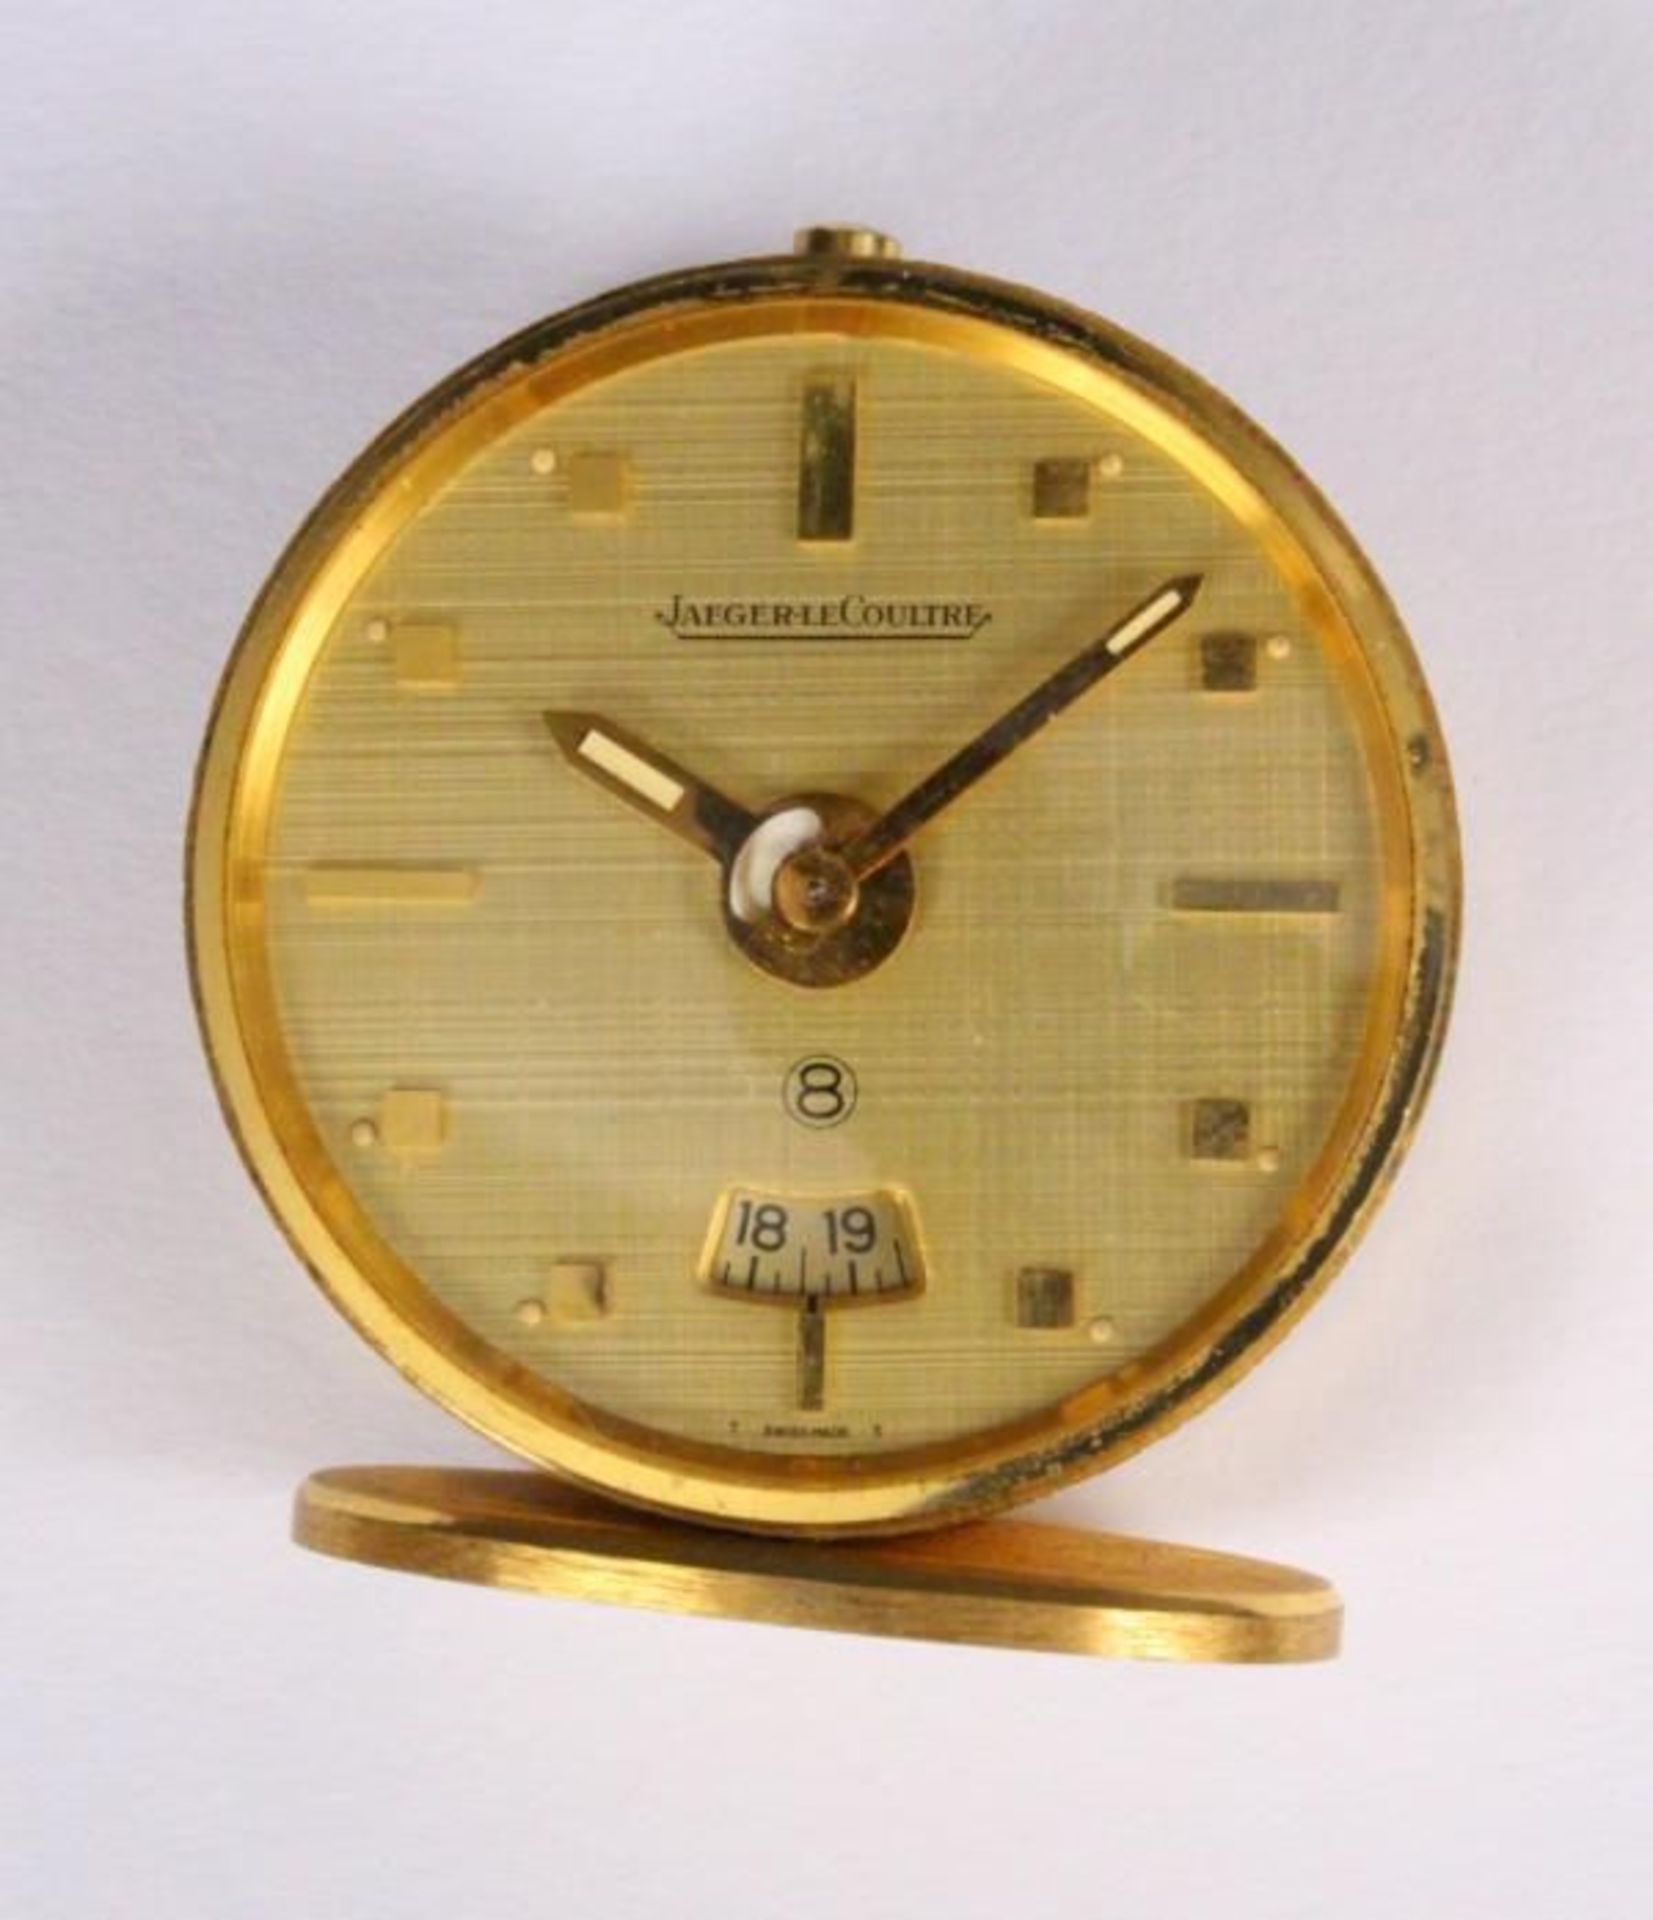 JAEGER LE COULTRE TRAVEL CLOCK Gold plated case, 8-day movement with date display, height 4.7cm,